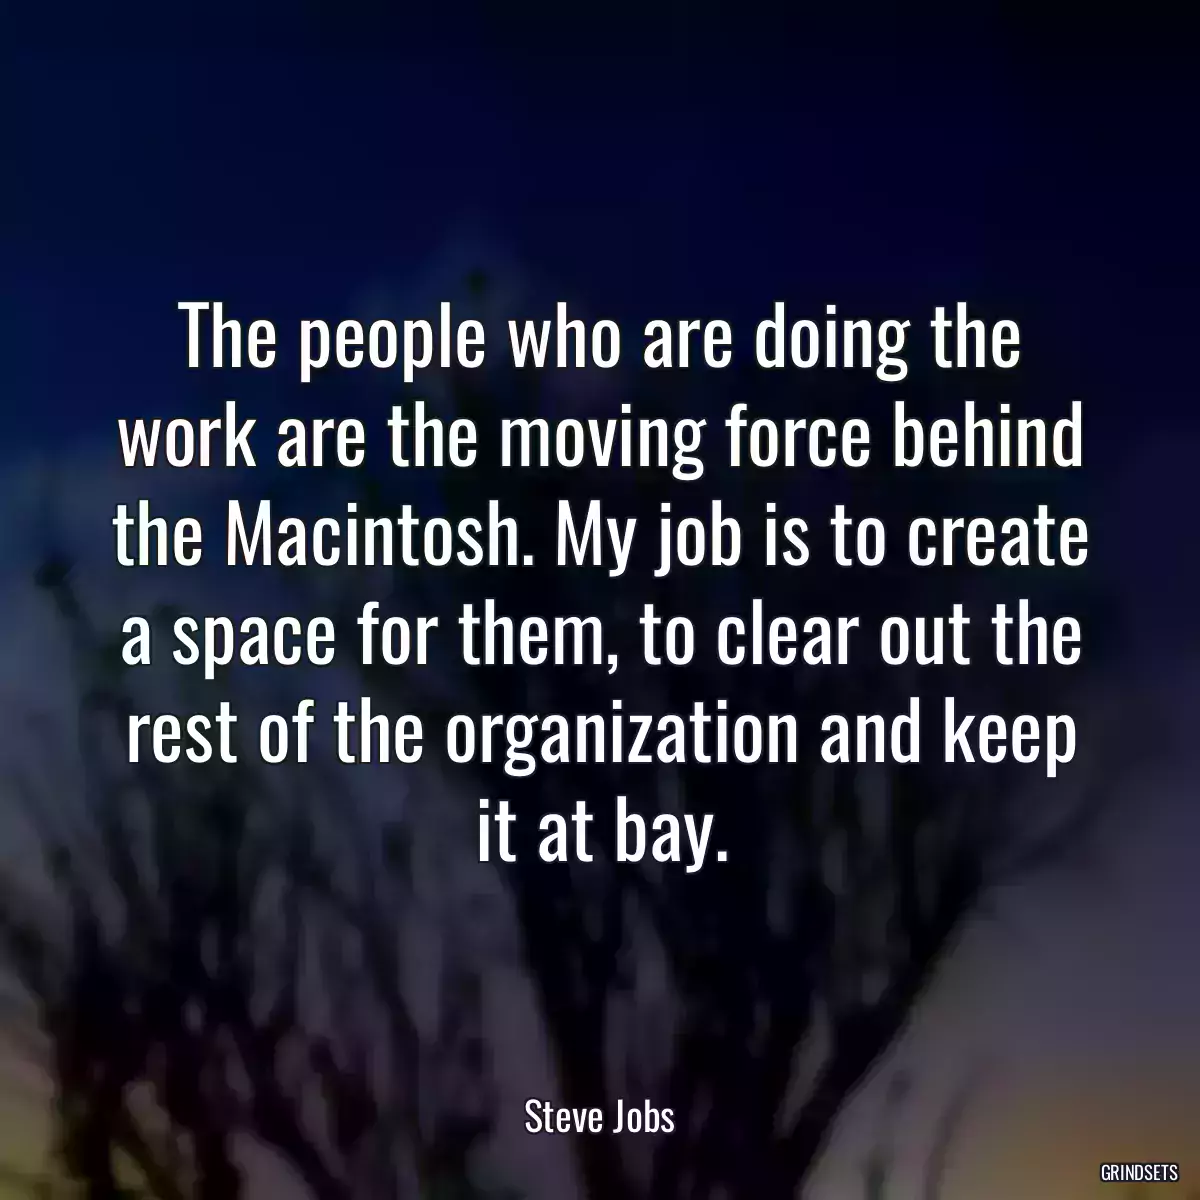 The people who are doing the work are the moving force behind the Macintosh. My job is to create a space for them, to clear out the rest of the organization and keep it at bay.